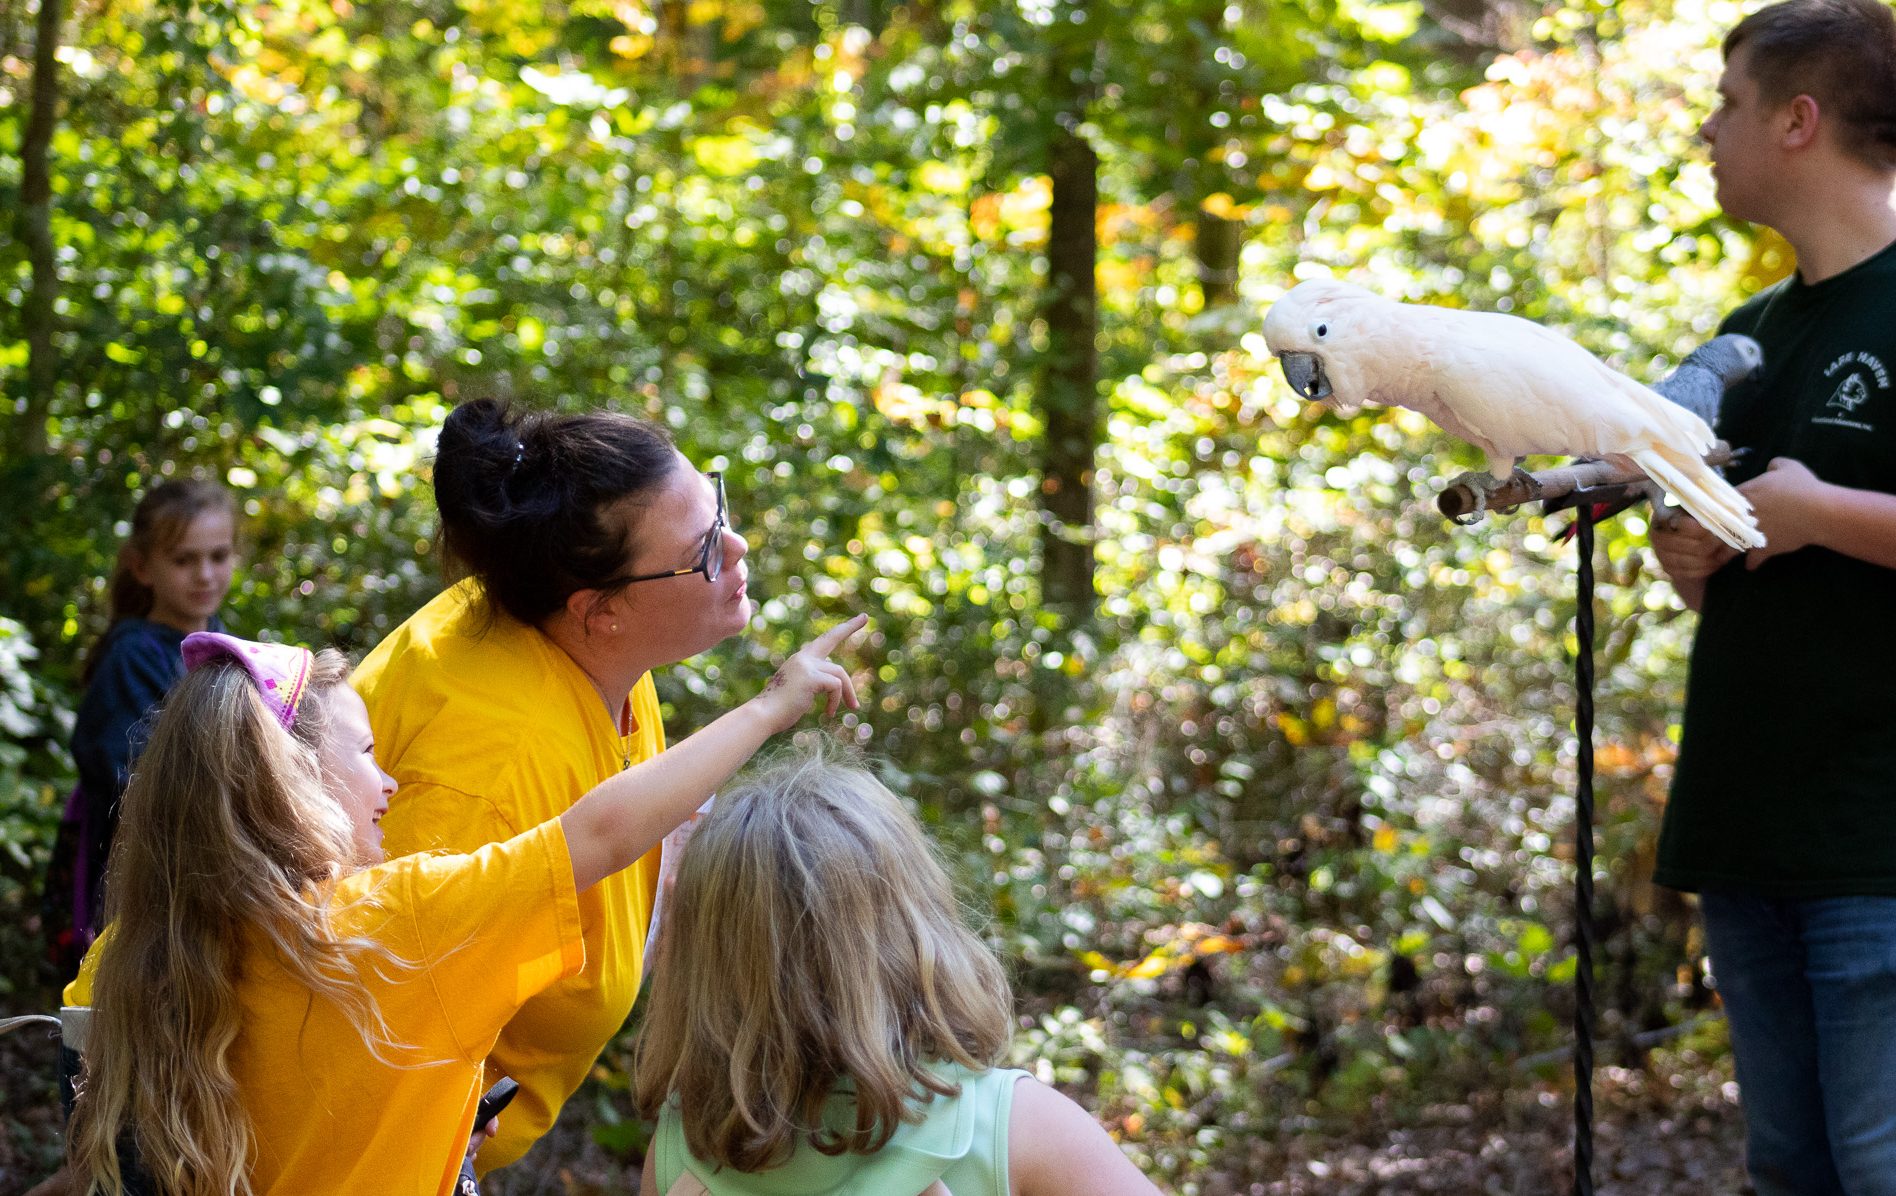  A volunteer and a Girl Scout both wearing yellow shirts point at a white bird at an outdoor animal event. 